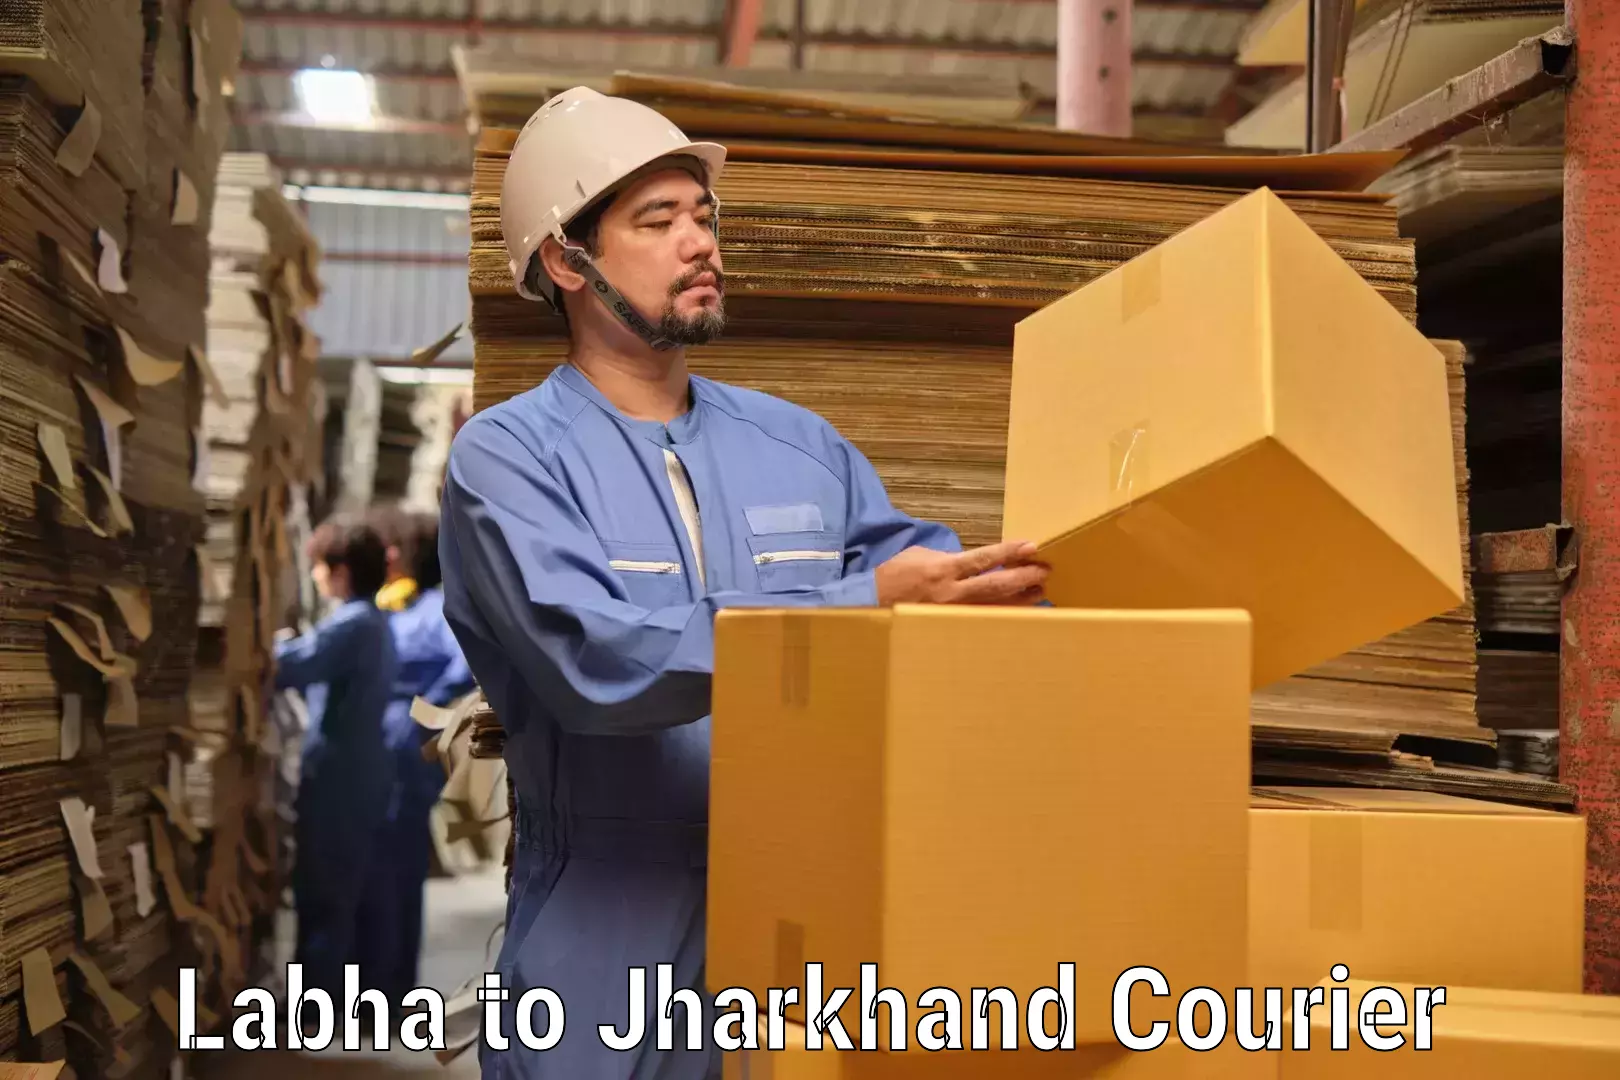 Tailored shipping plans Labha to Jamshedpur